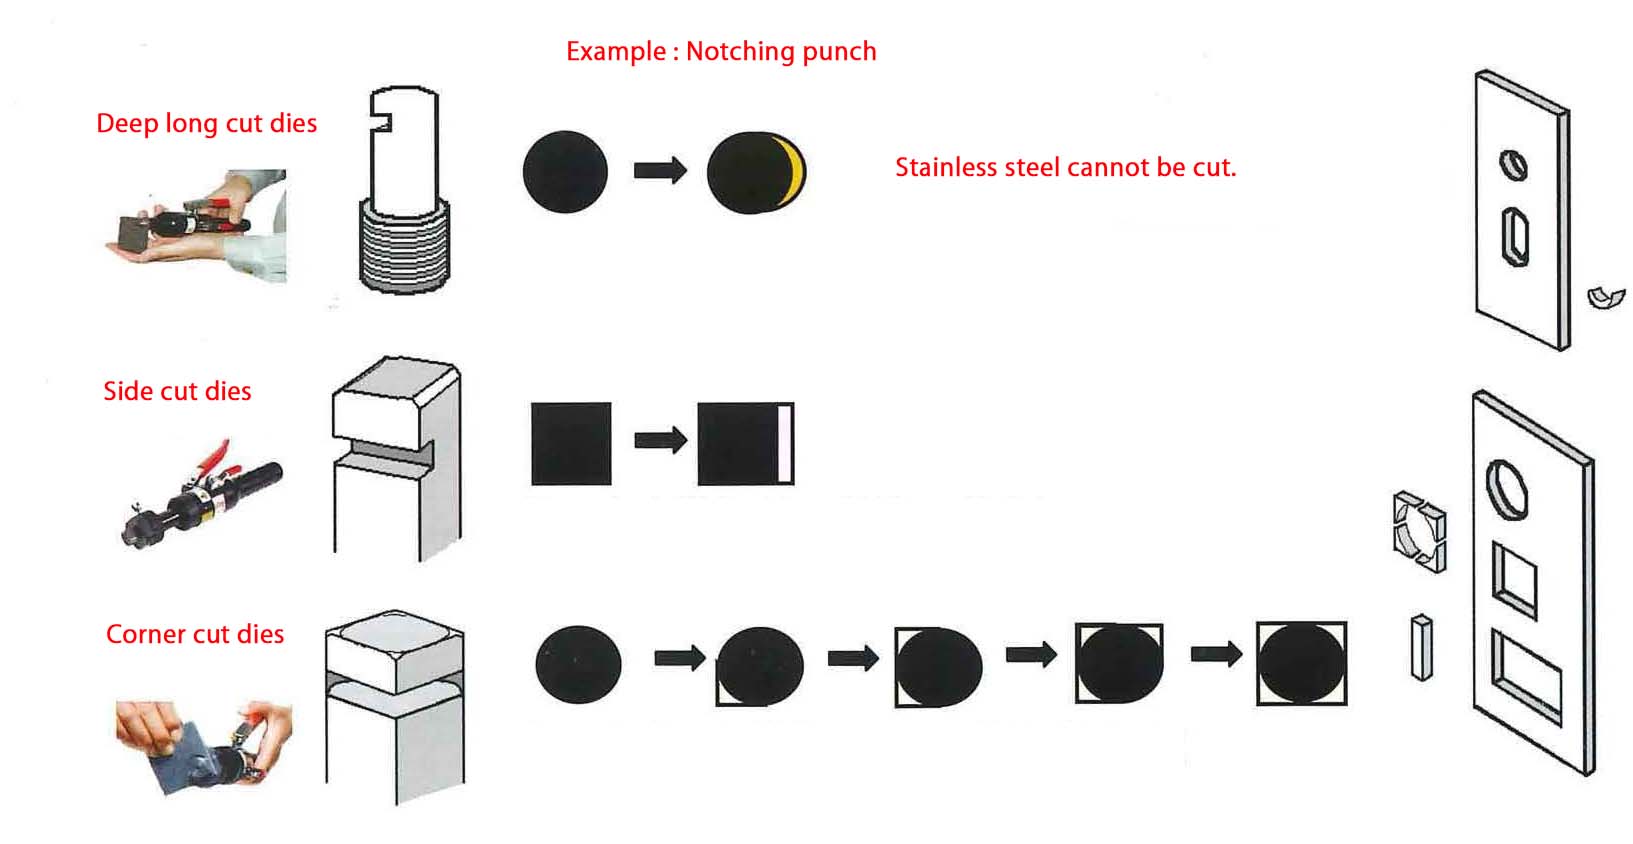 Example of Notching Punch